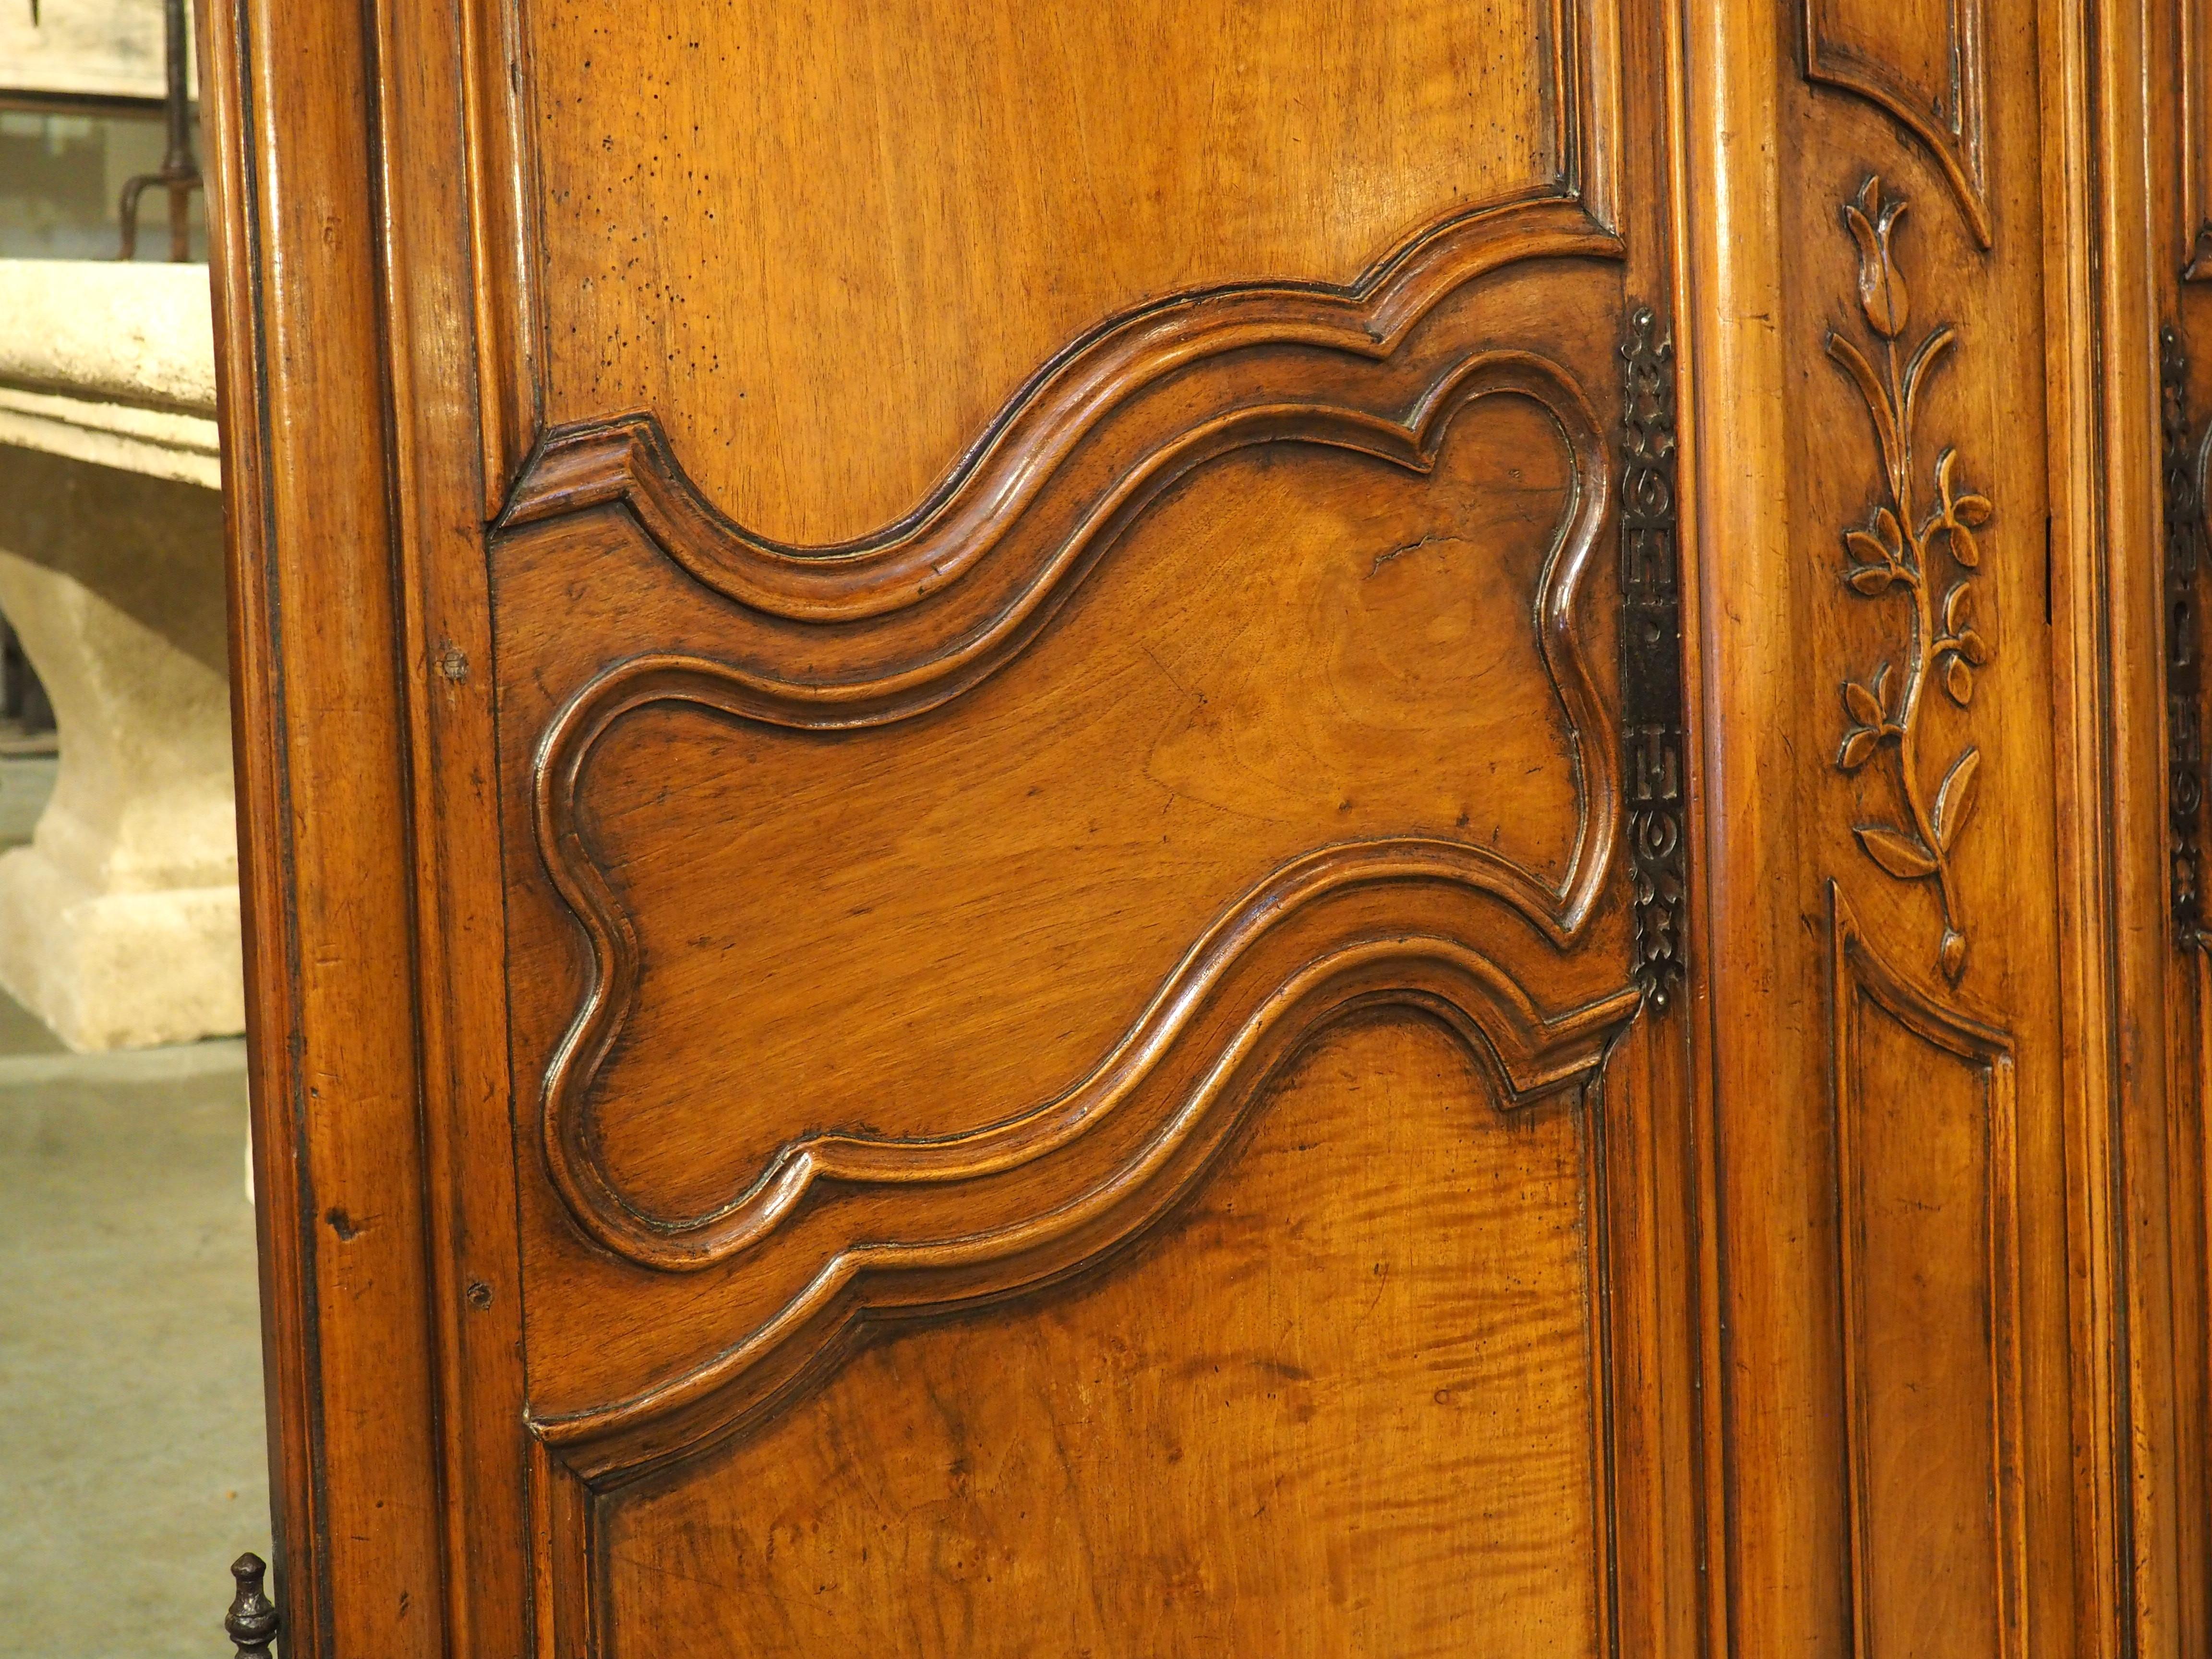 Pair of Circa 1750 Solid Walnut Façade or Cabinet Doors from Provence, France For Sale 2